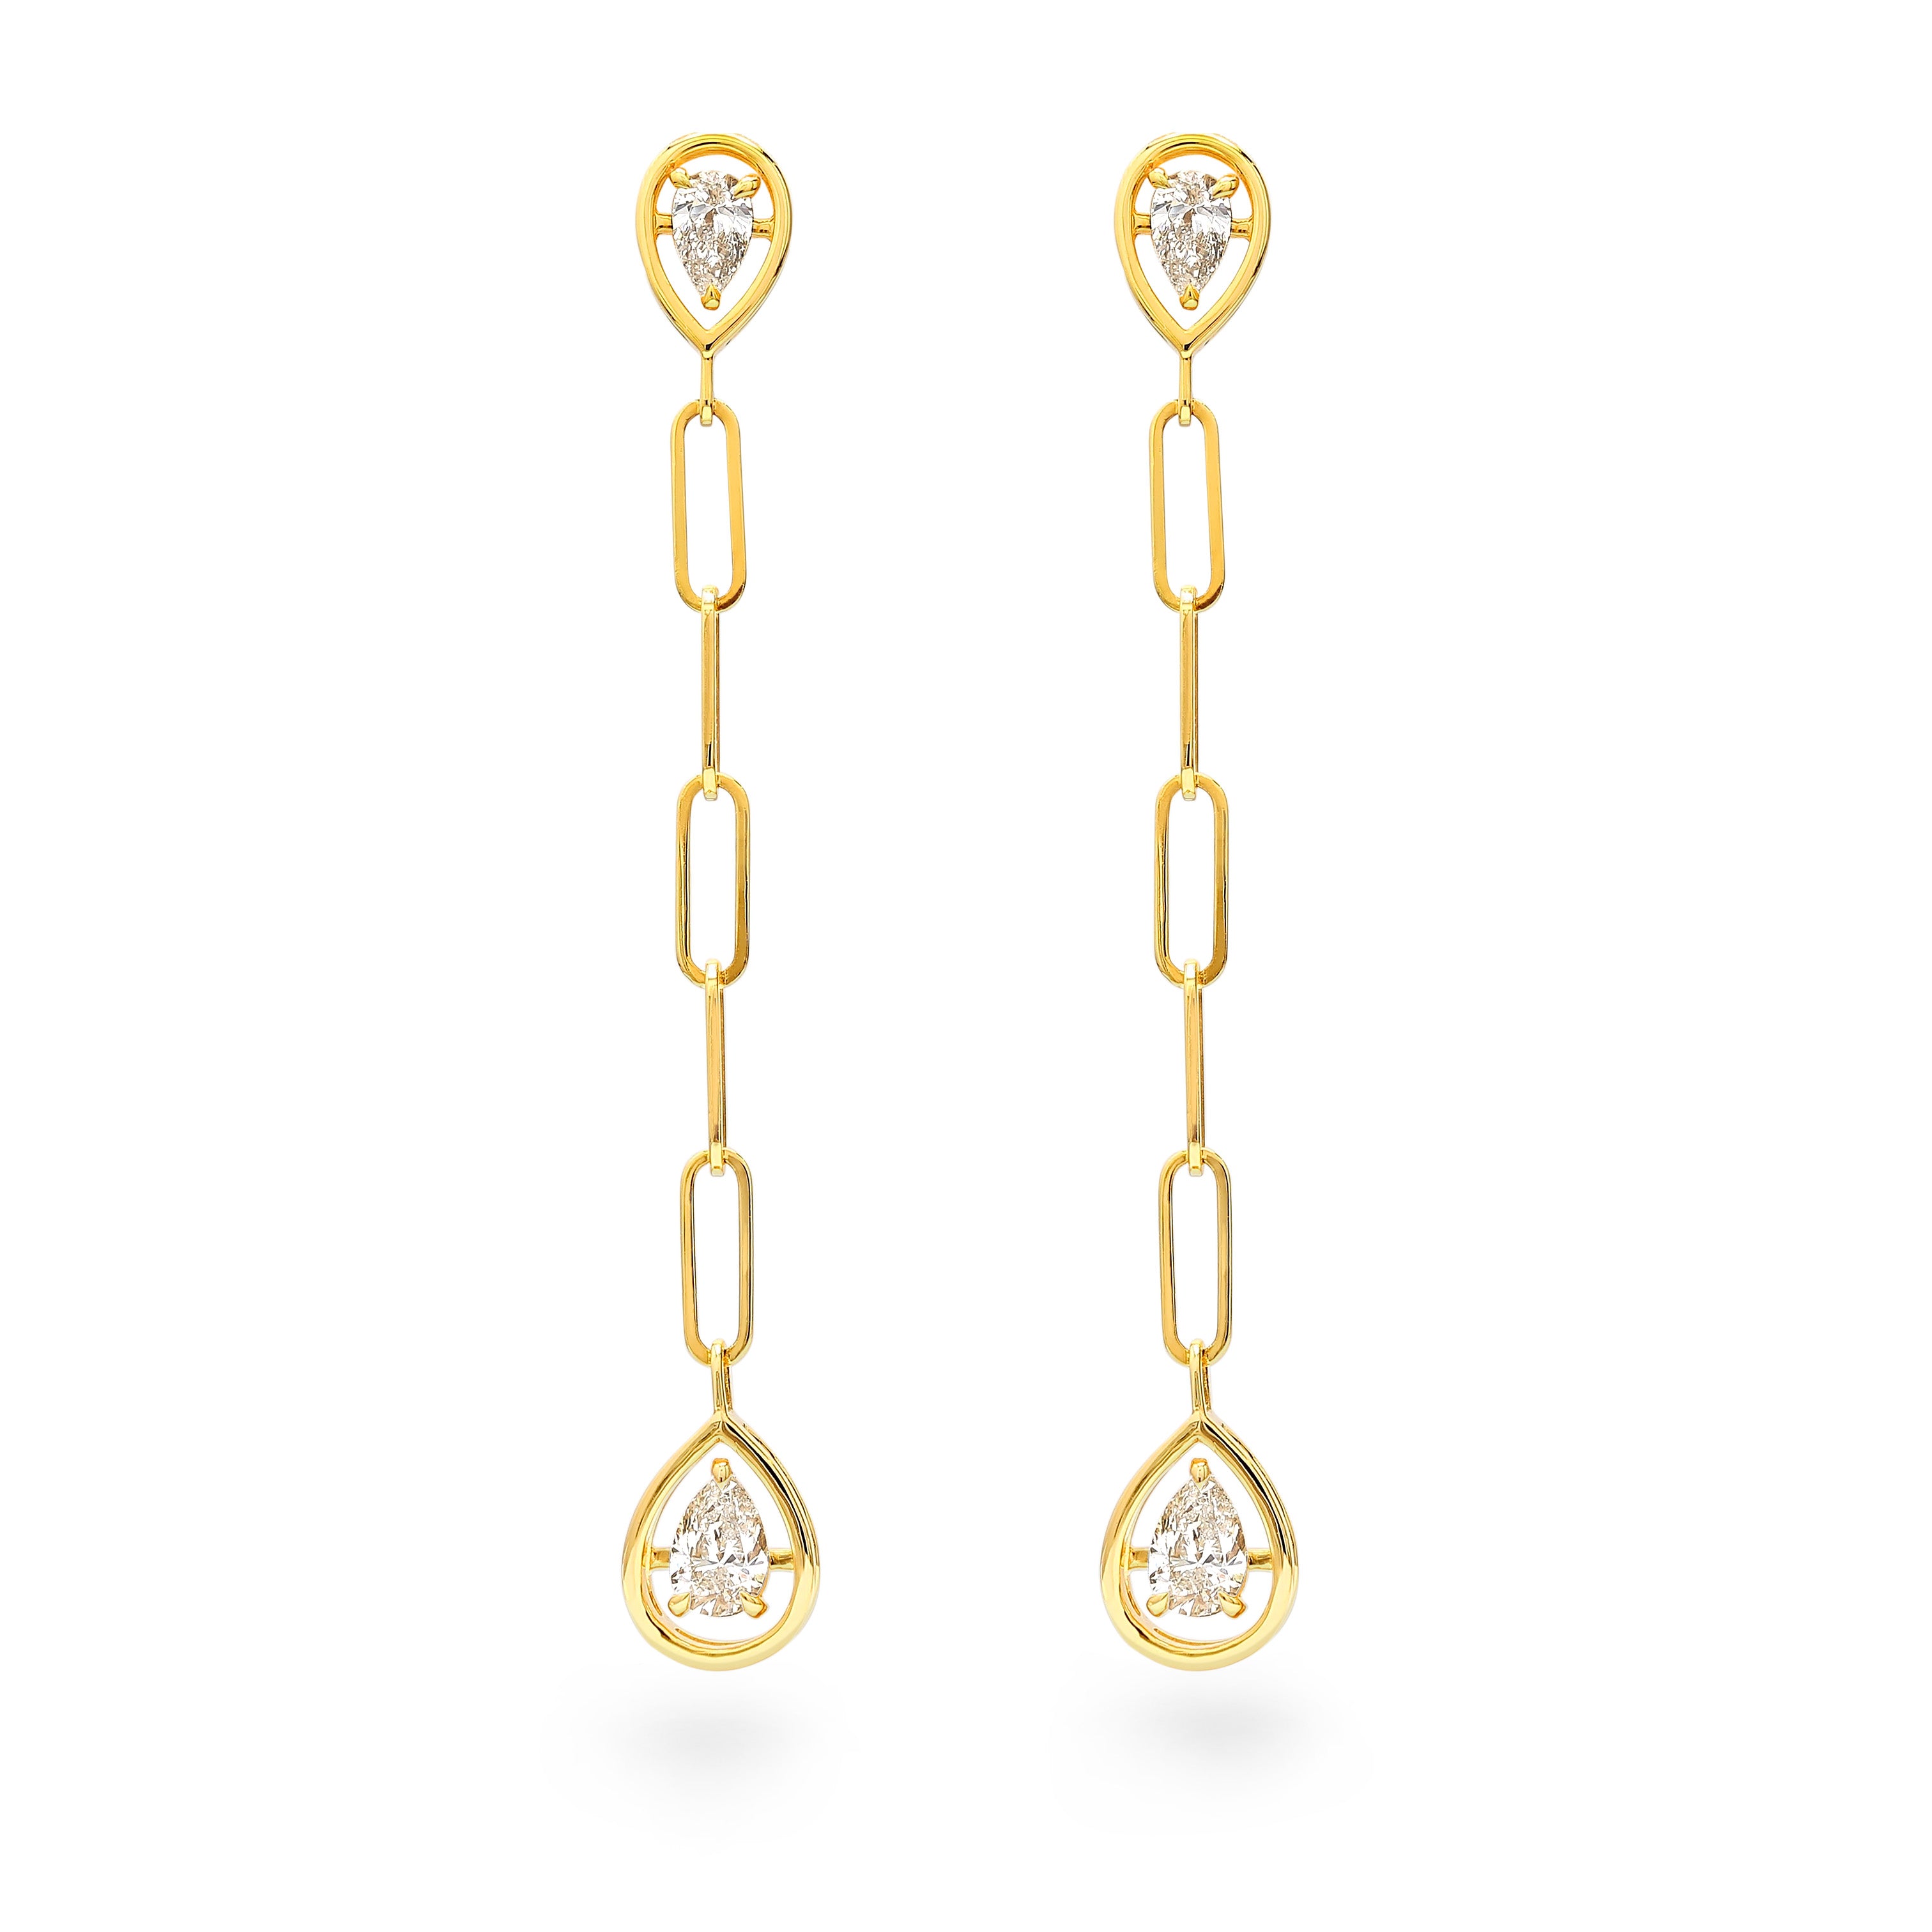 Shimansky - Saturn Pear Diamond Drop Earrings 0.70ct crafted in 14K Yellow Gold